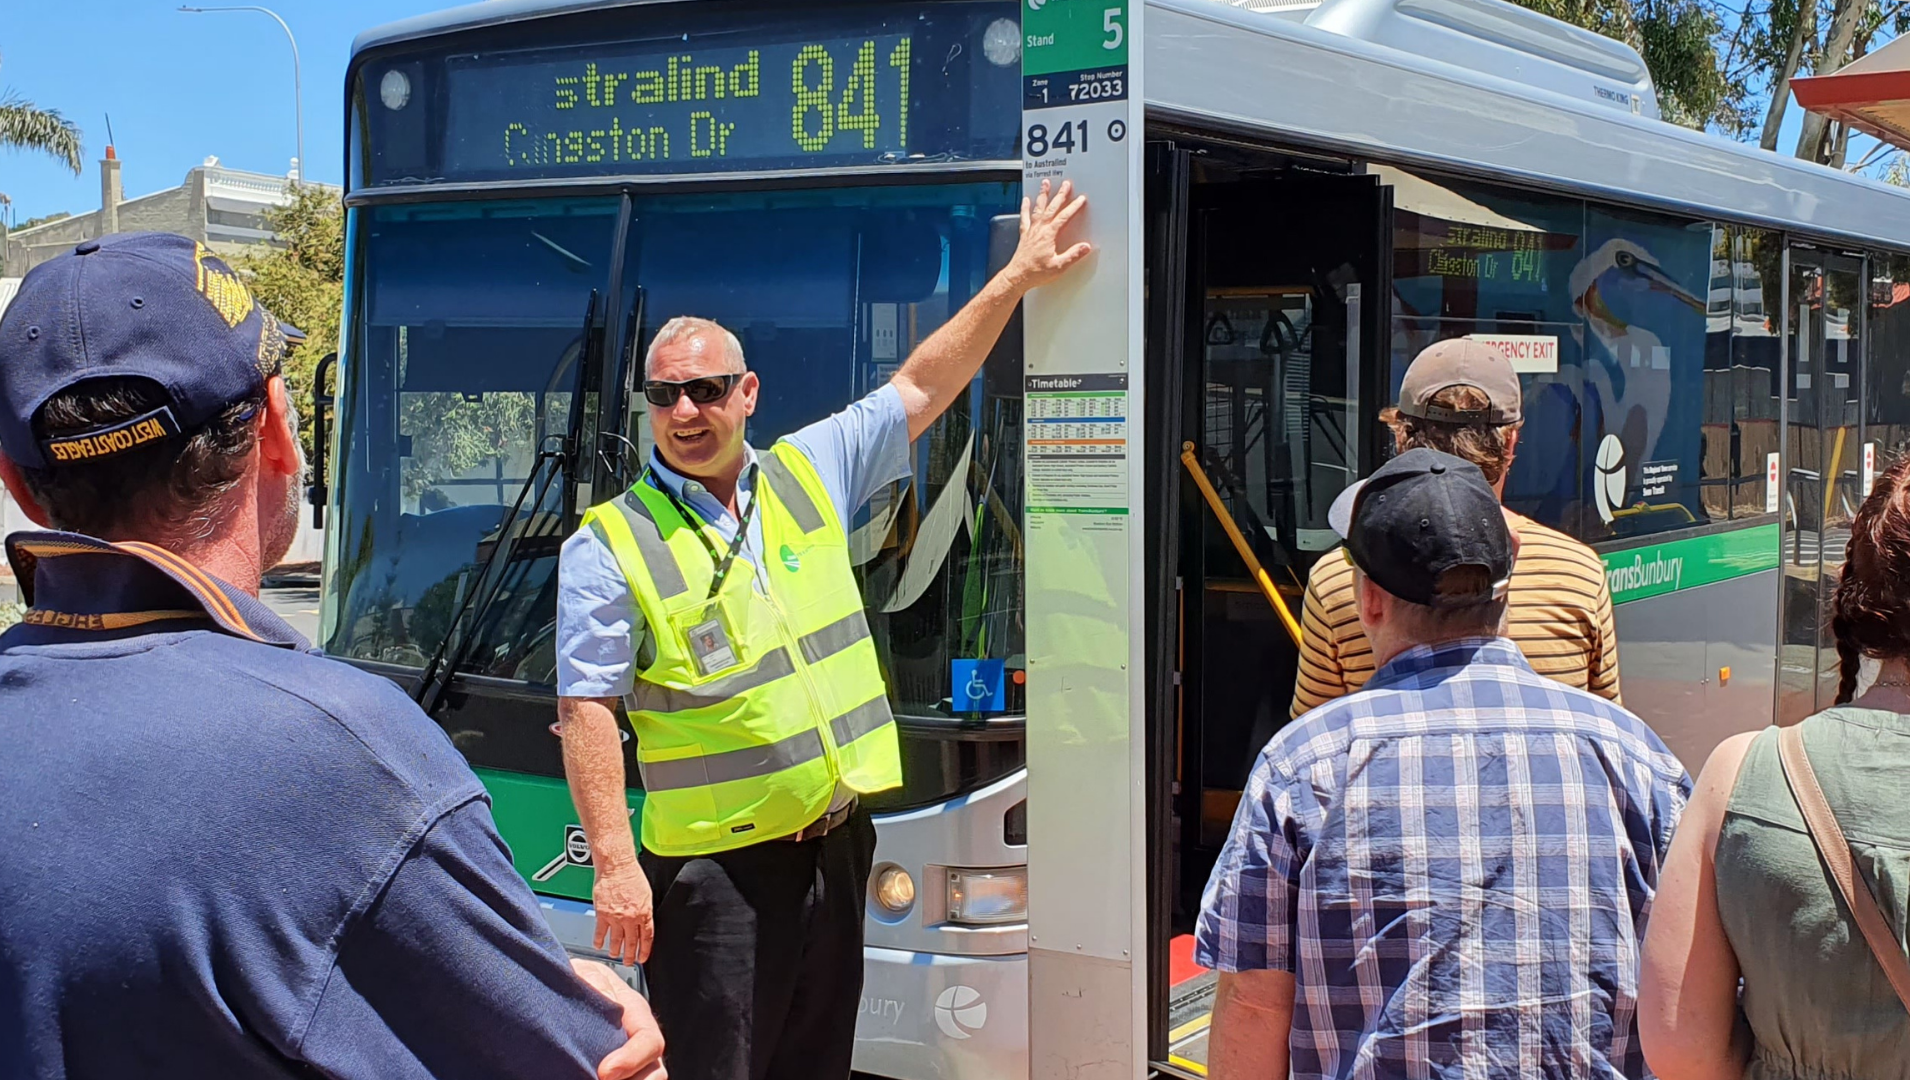 A Transperth worker showing a small crowd of people a stationary bus timetable